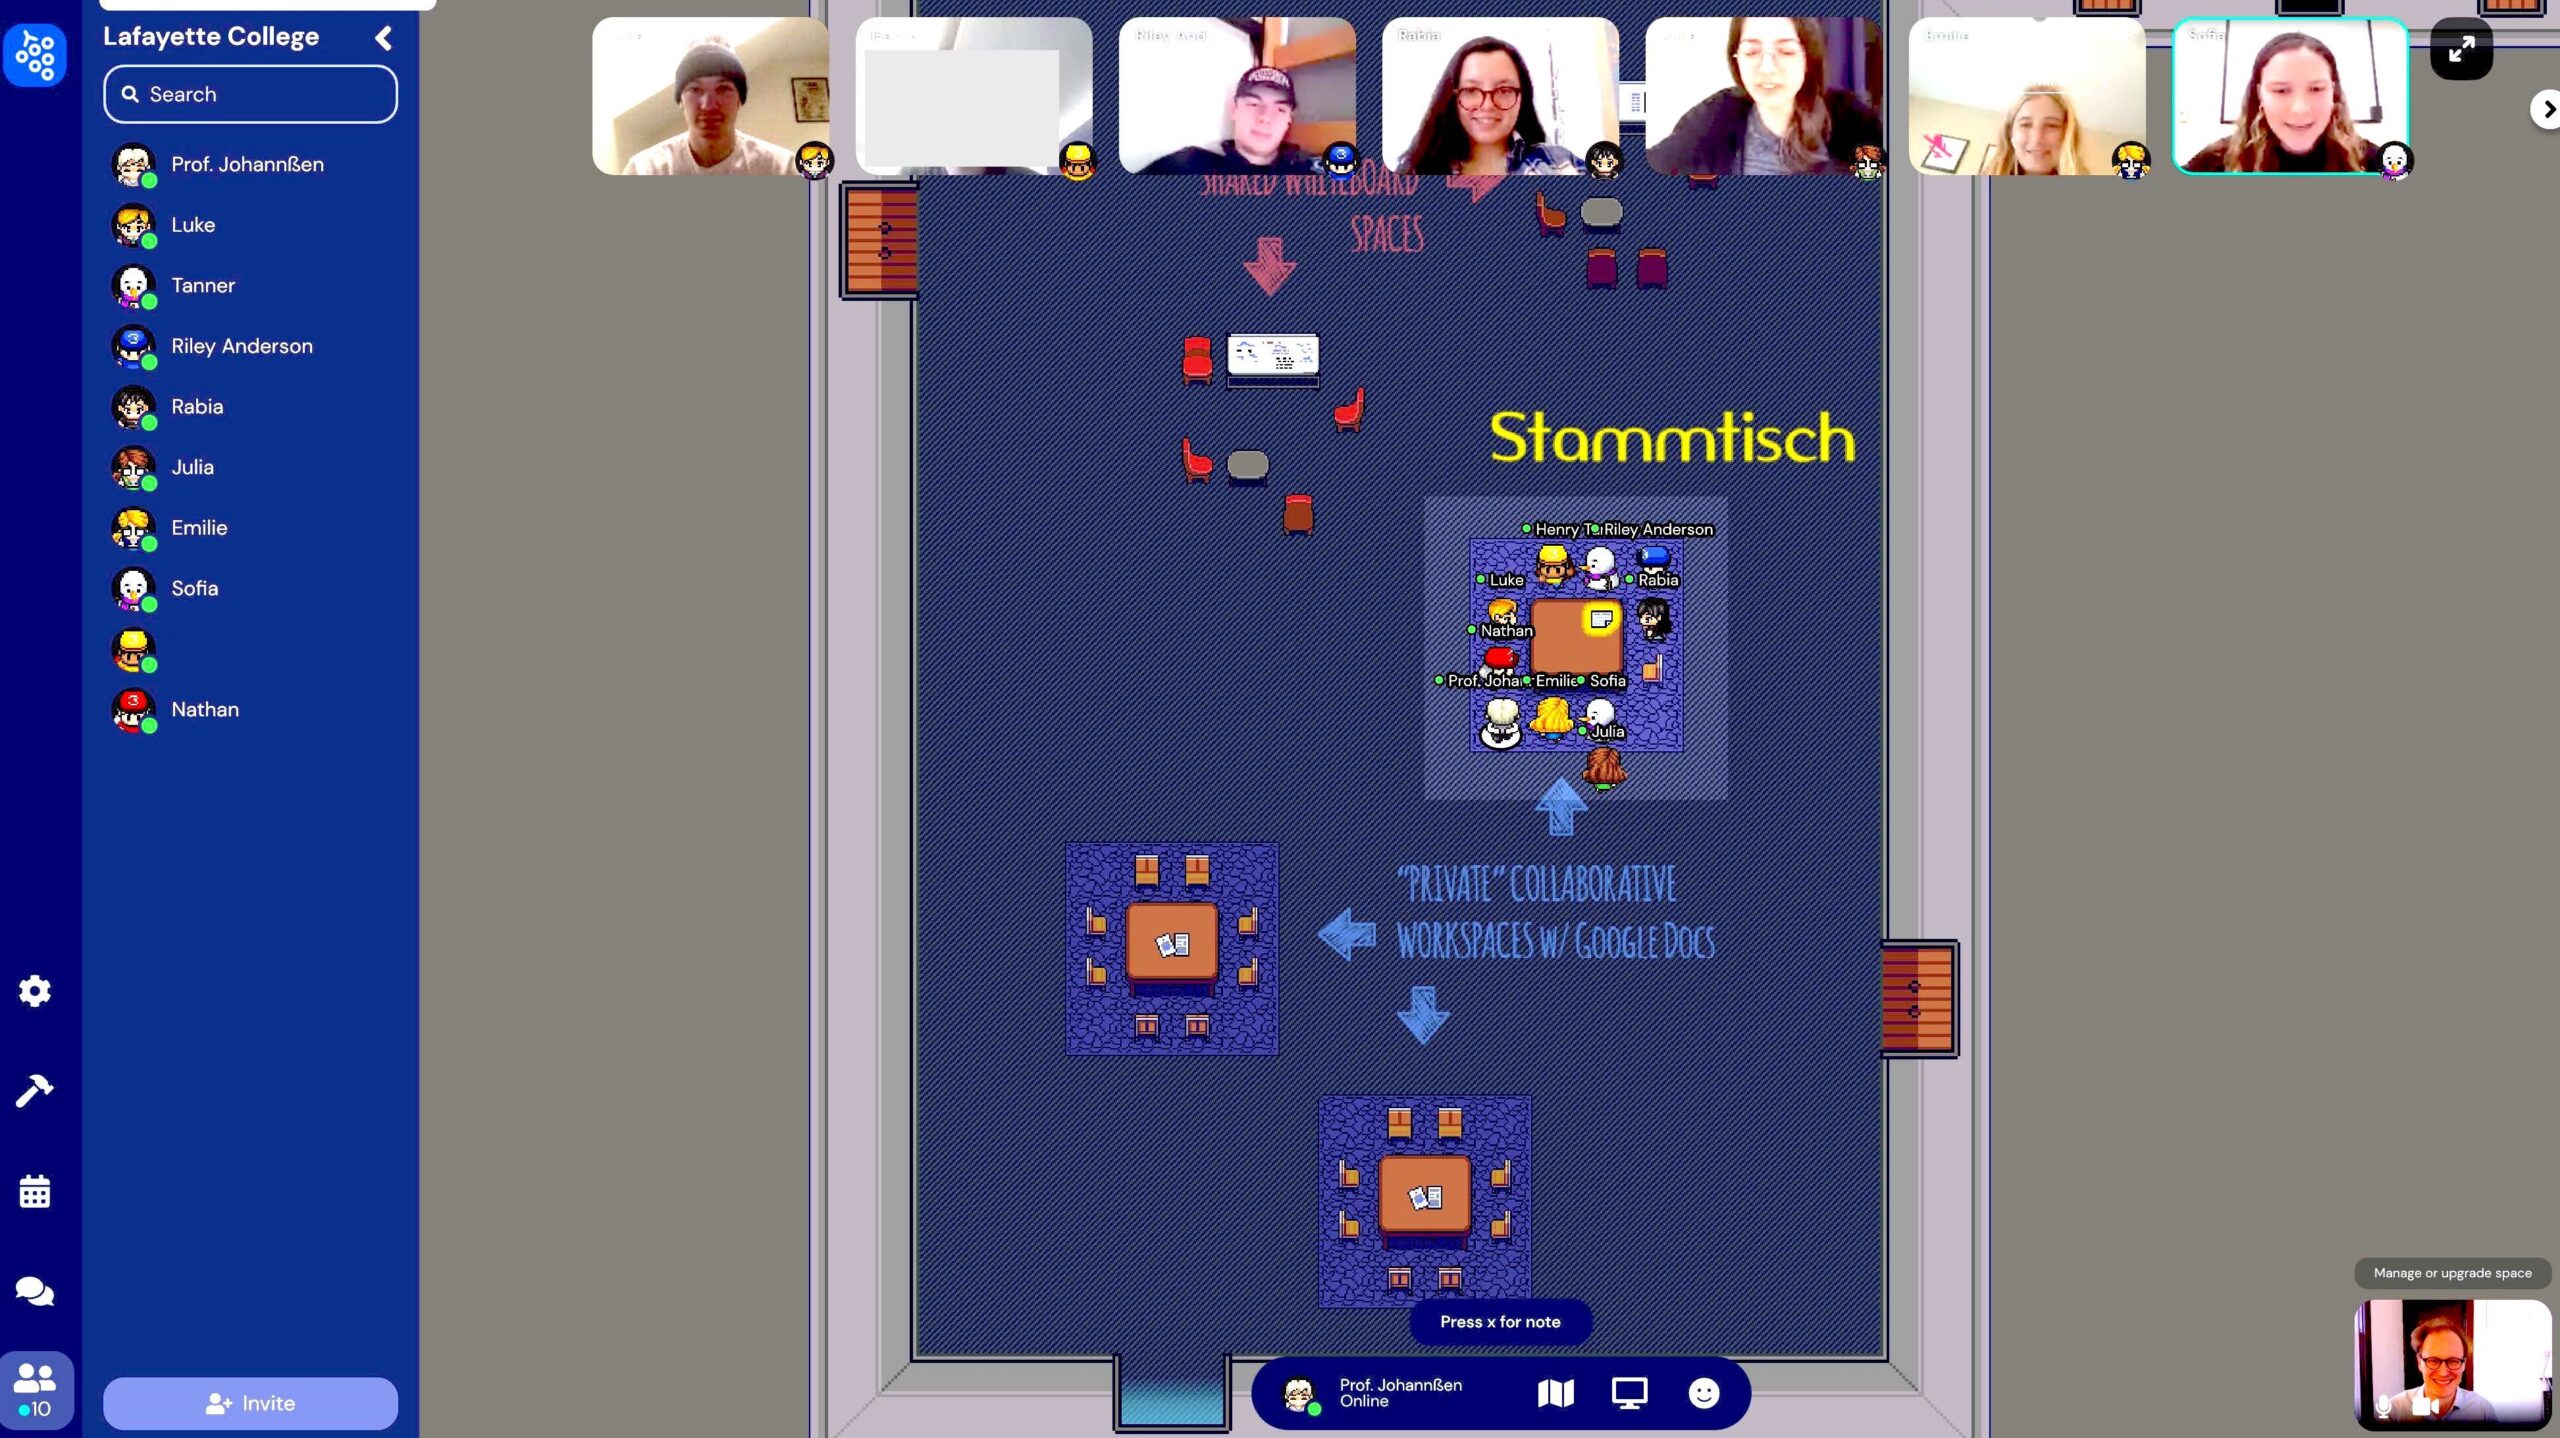 a screen shot of Professor Johannssen's gather town with student's participating